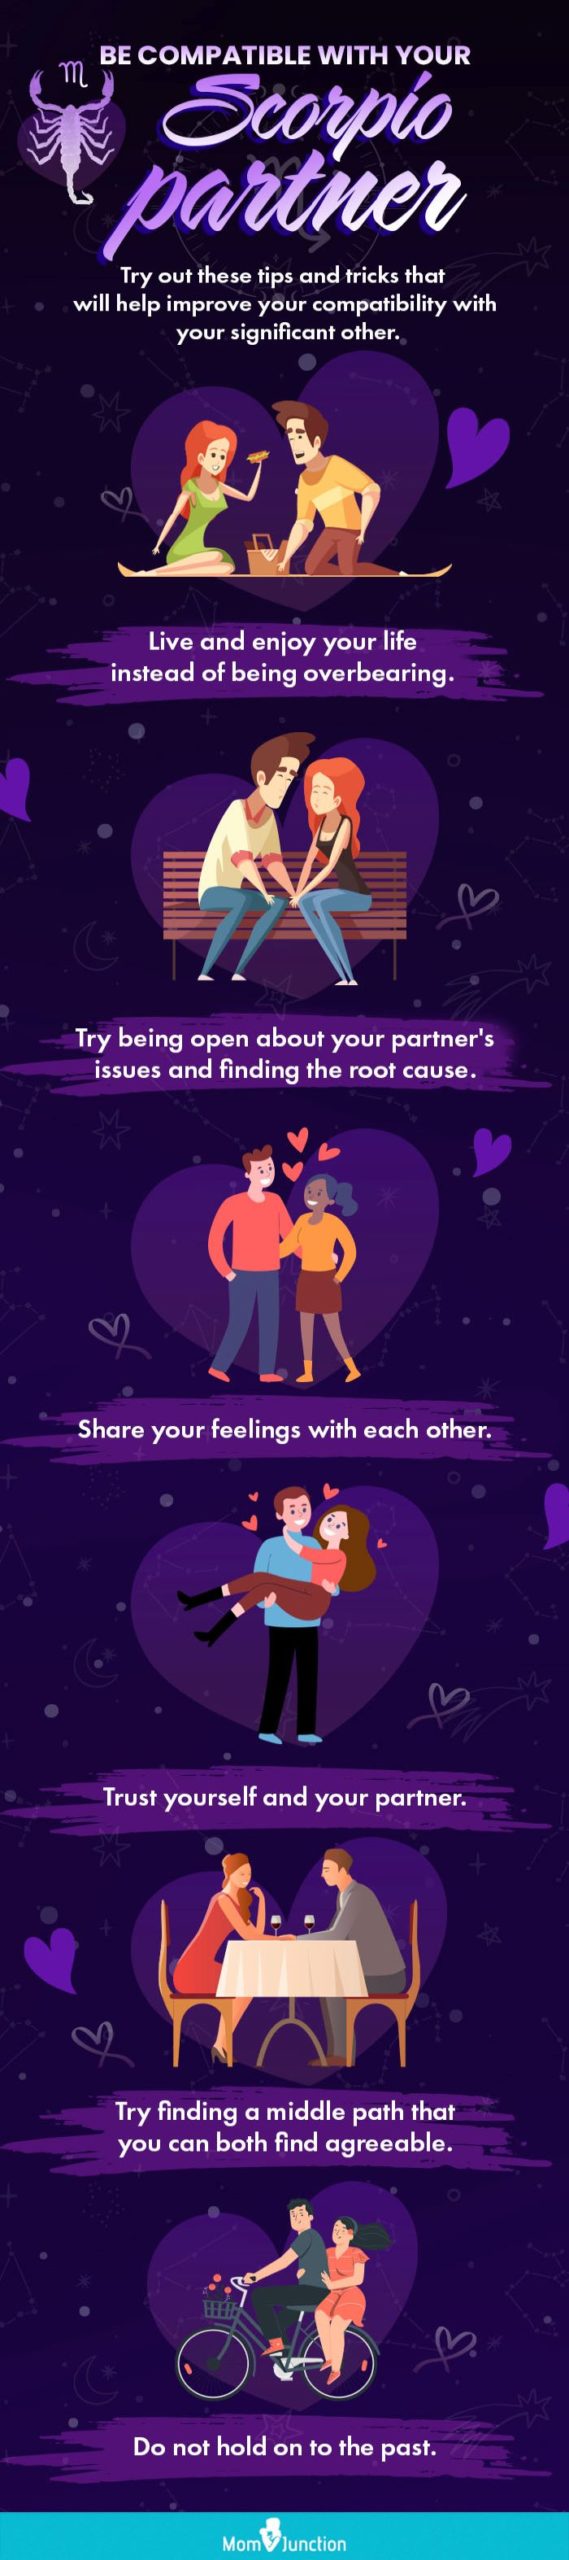 be compatible with your scorpio partner [infographic]